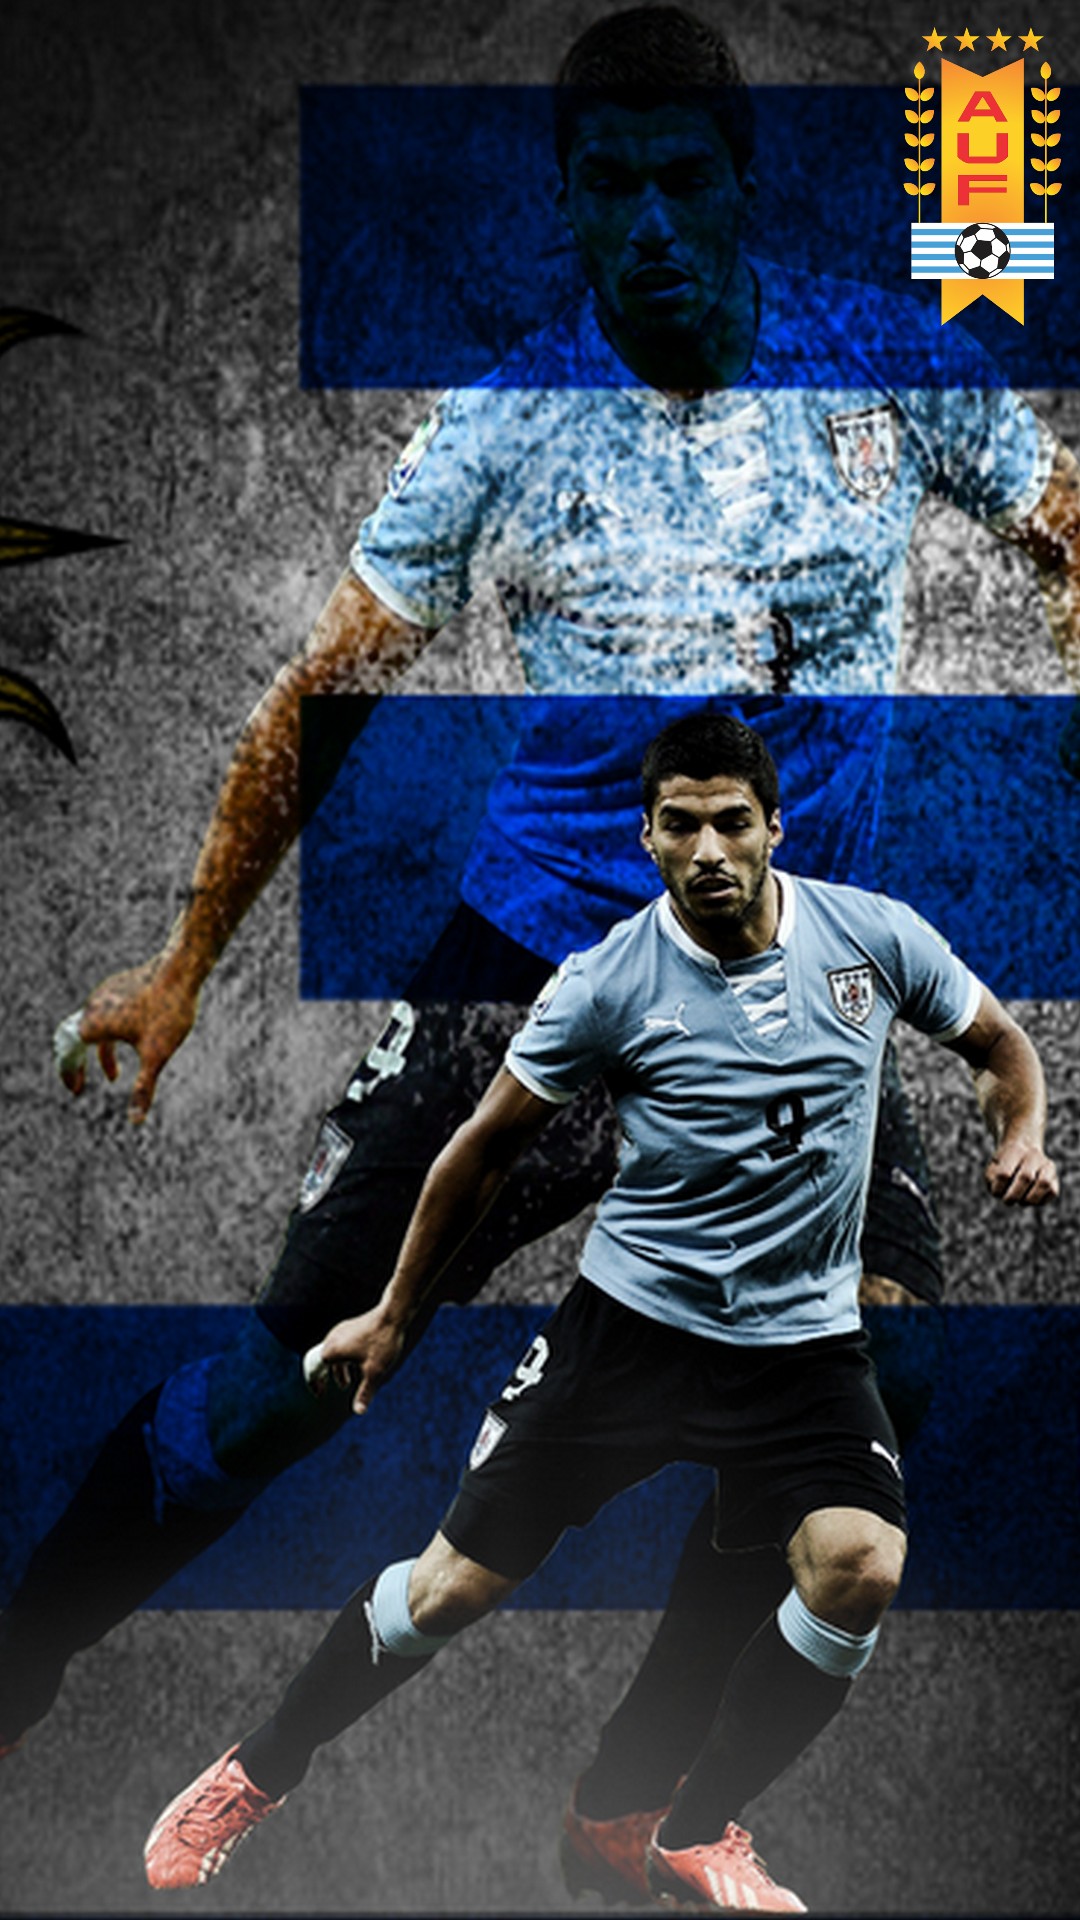 Luis Suarez Uruguay HD Wallpaper For iPhone With Resolution 1080X1920 pixel. You can make this wallpaper for your Mac or Windows Desktop Background, iPhone, Android or Tablet and another Smartphone device for free